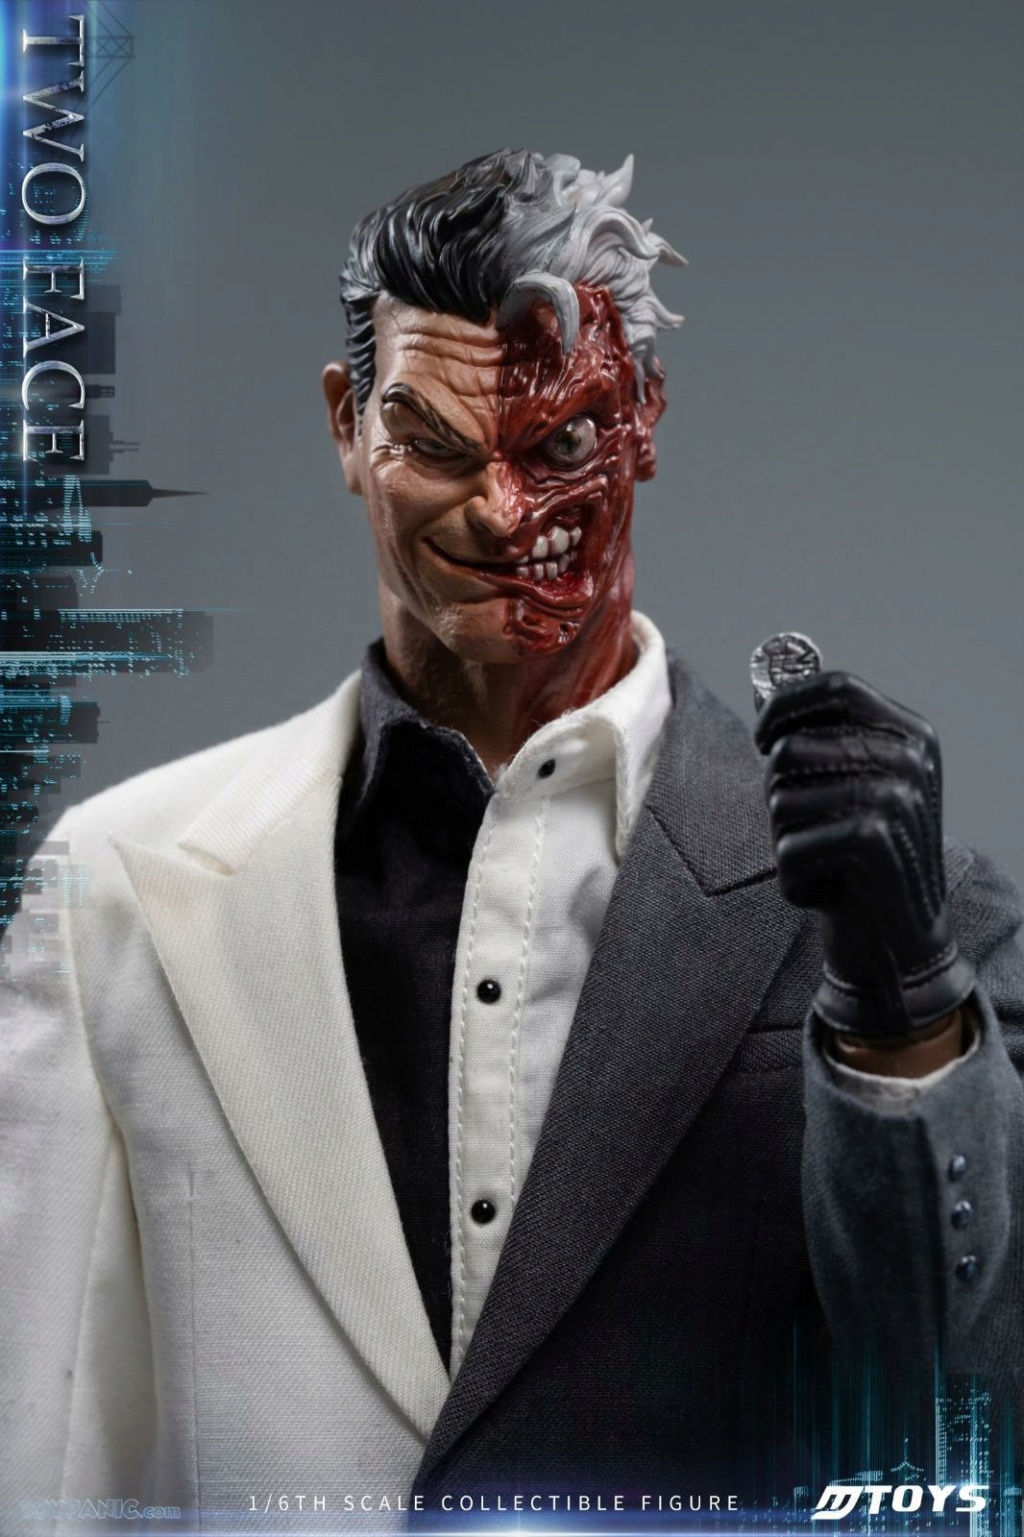 NEW PRODUCT: Mtoys MS013 1/6 Scale Two Face figure 4430